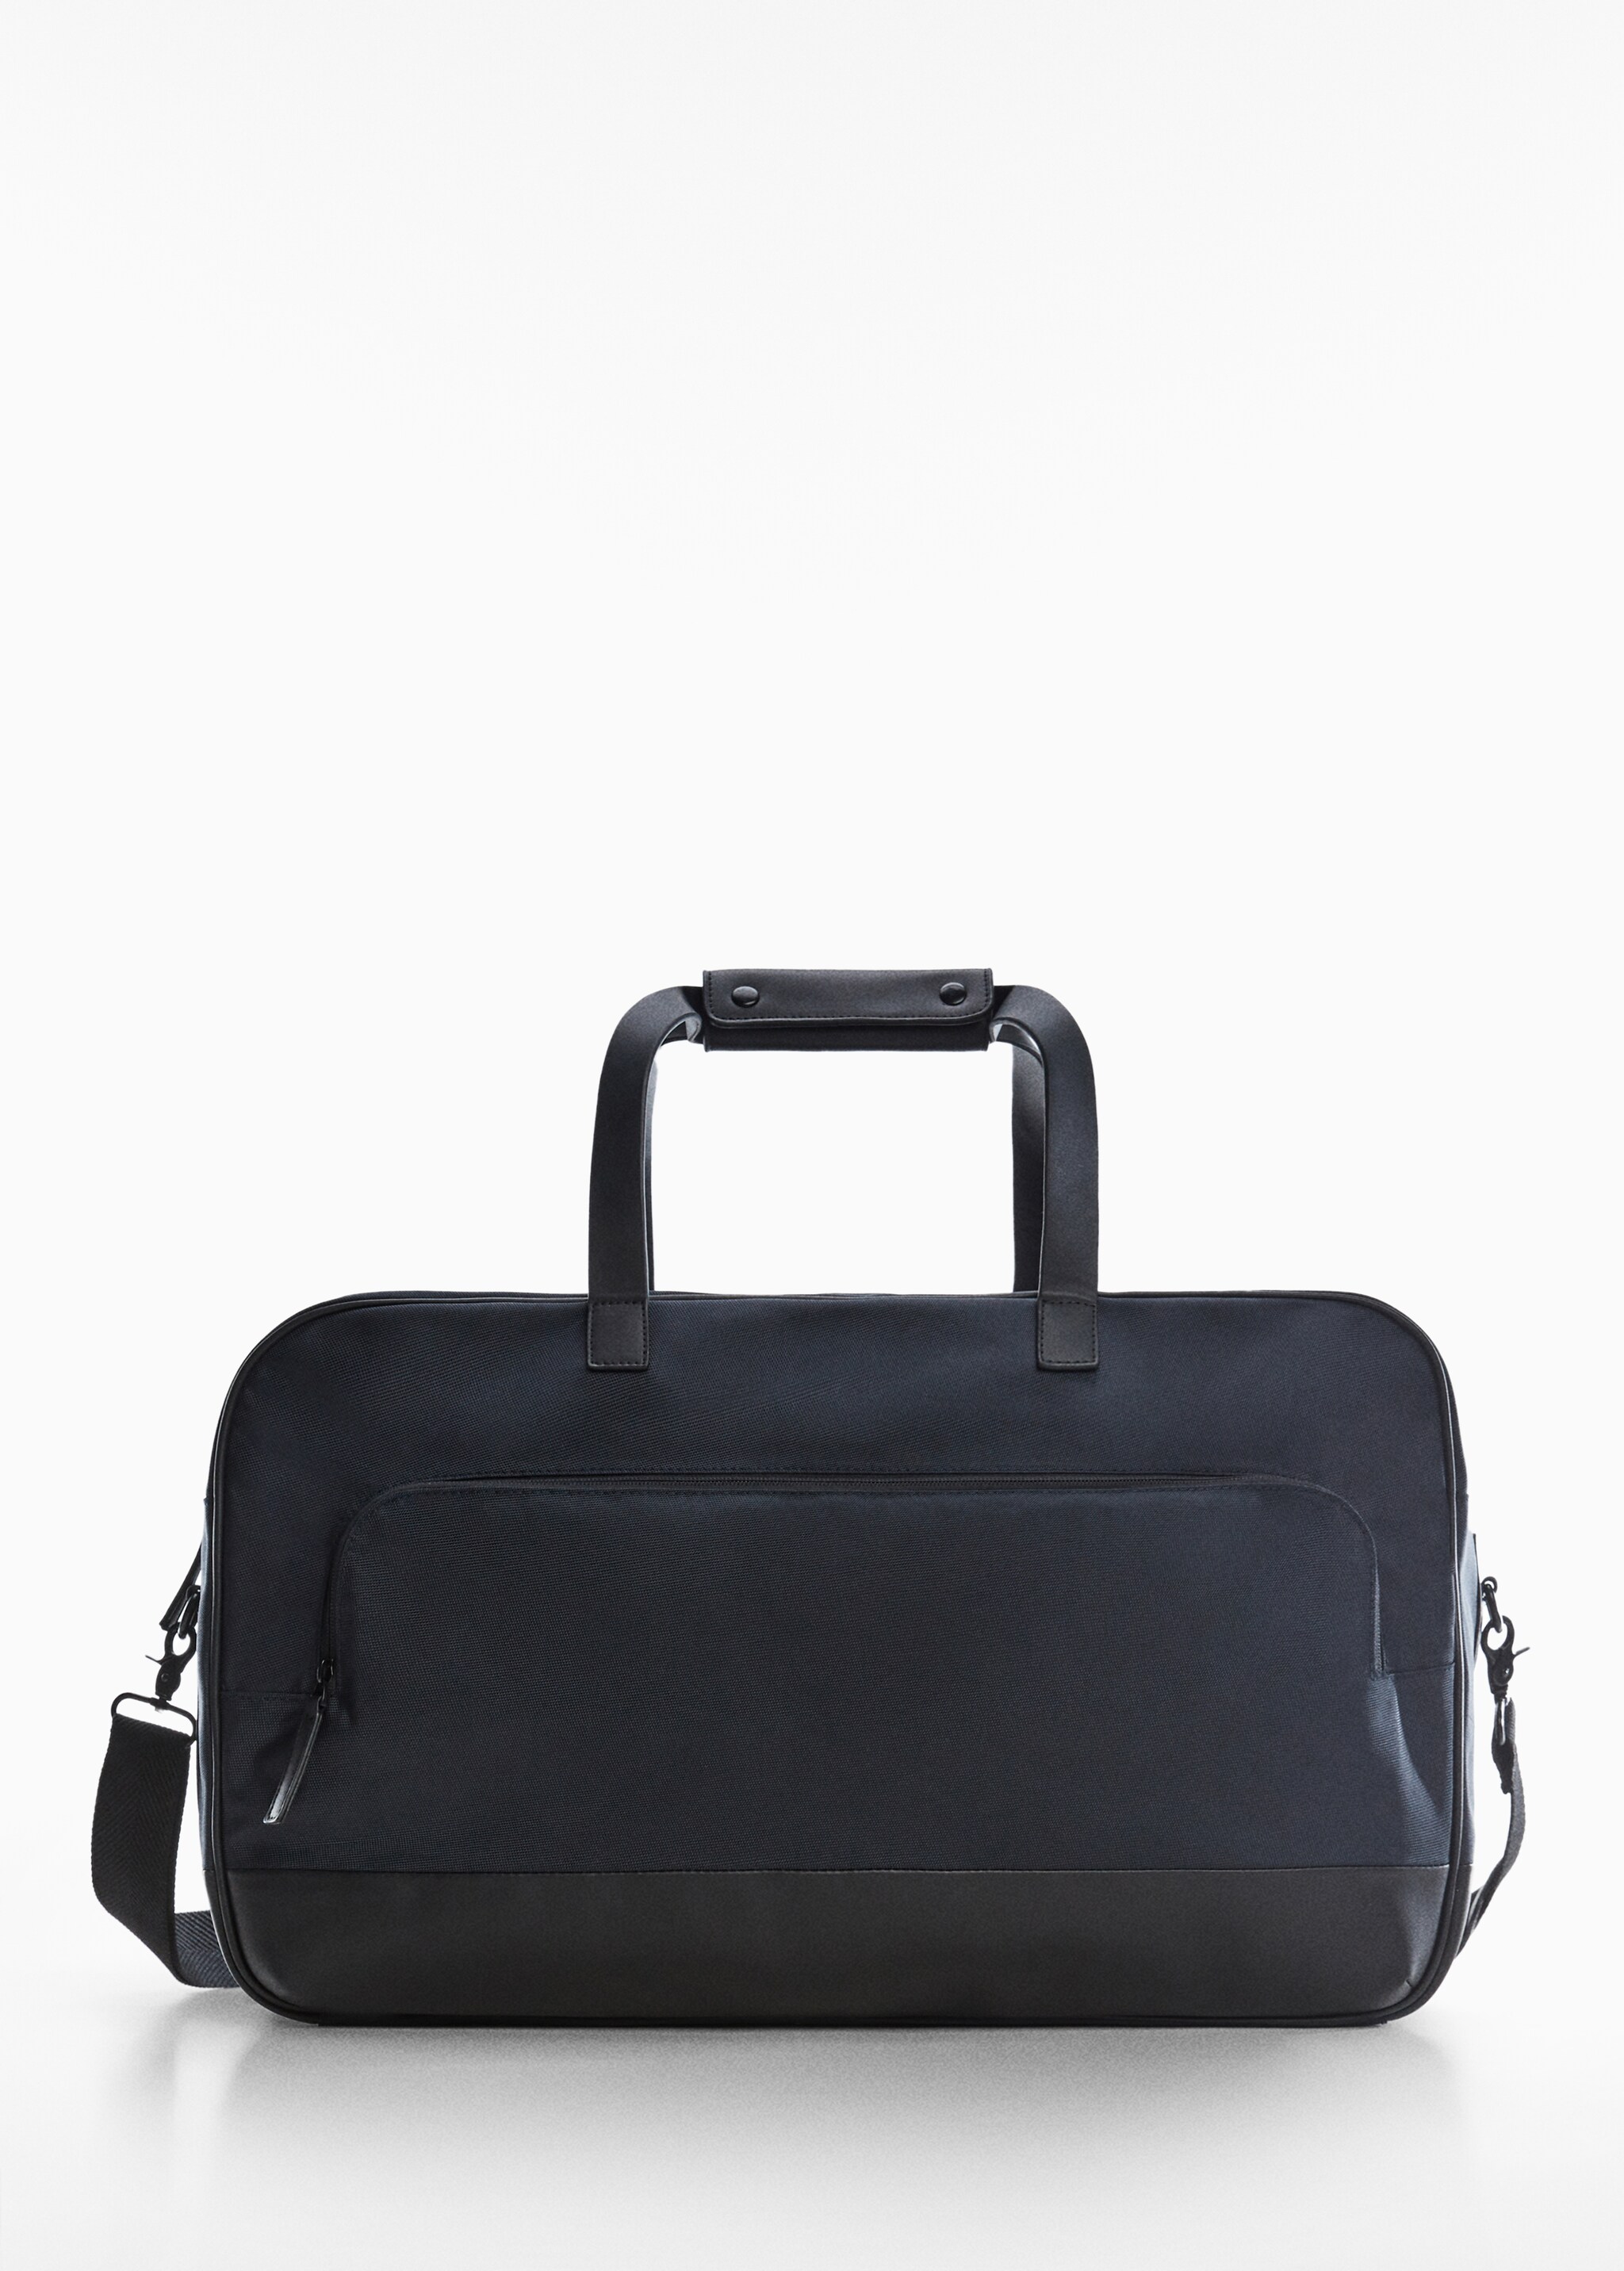 Combined travel bag - Article without model